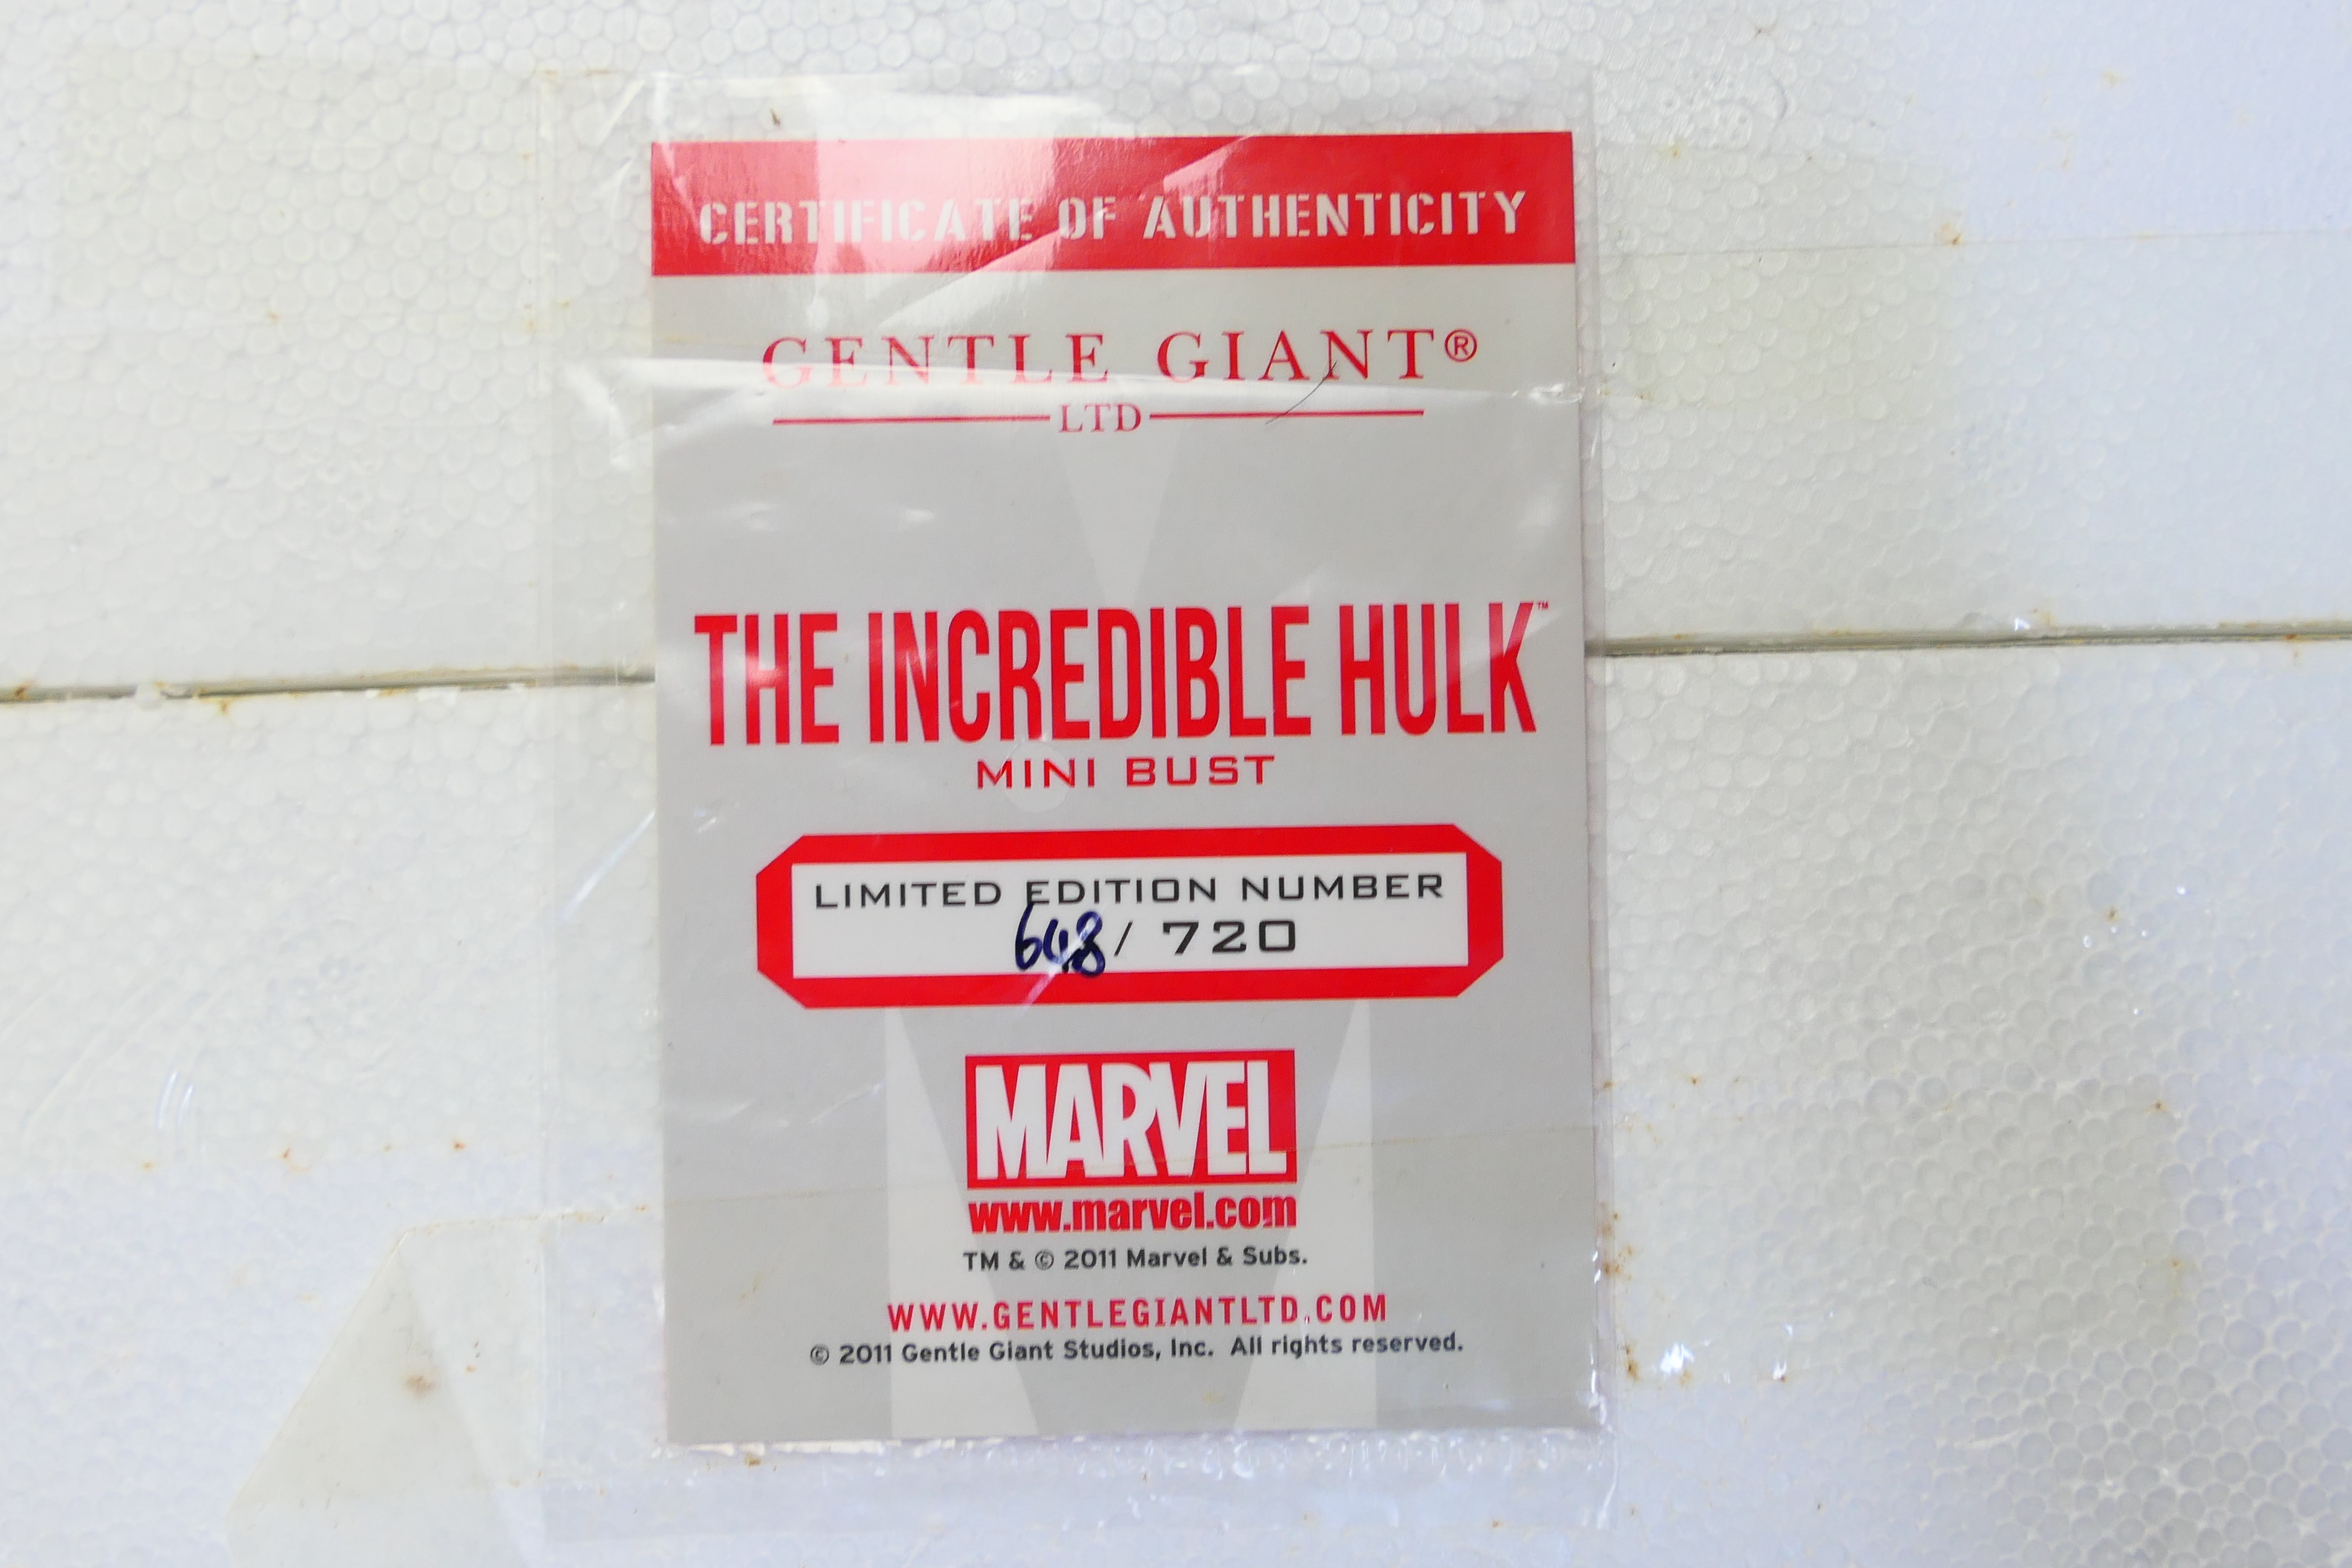 Gentle Giant Ltd - Marvel - A limited edition The Incredible Hulk 7.5 inch mini bust. - Image 6 of 6